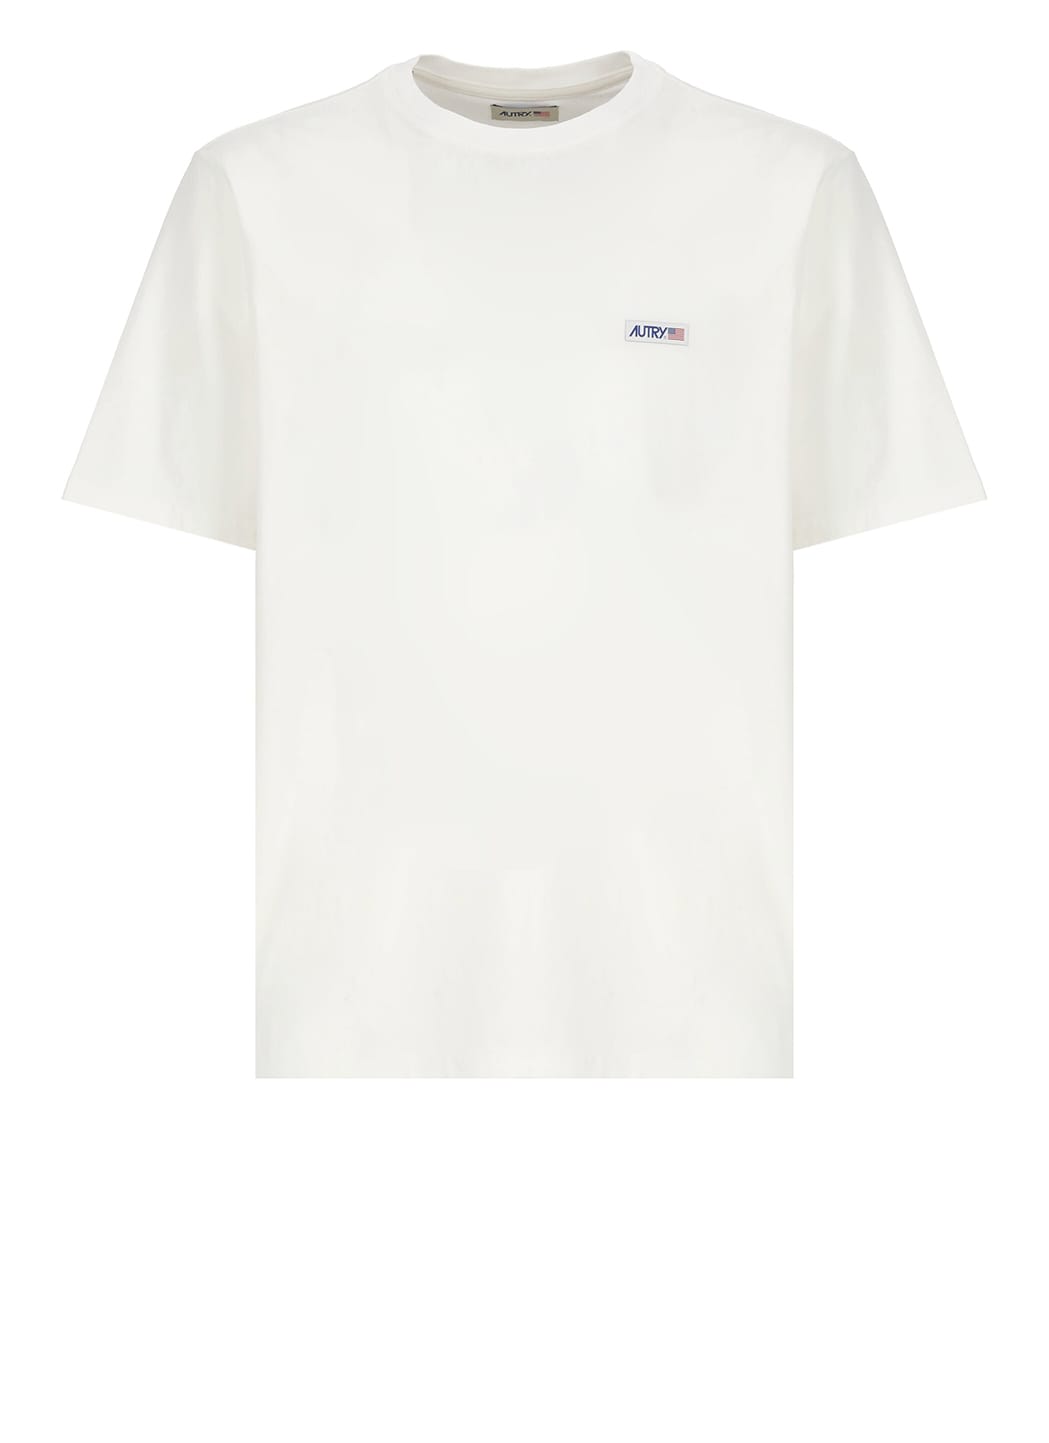 Shop Autry Main T-shirt In White